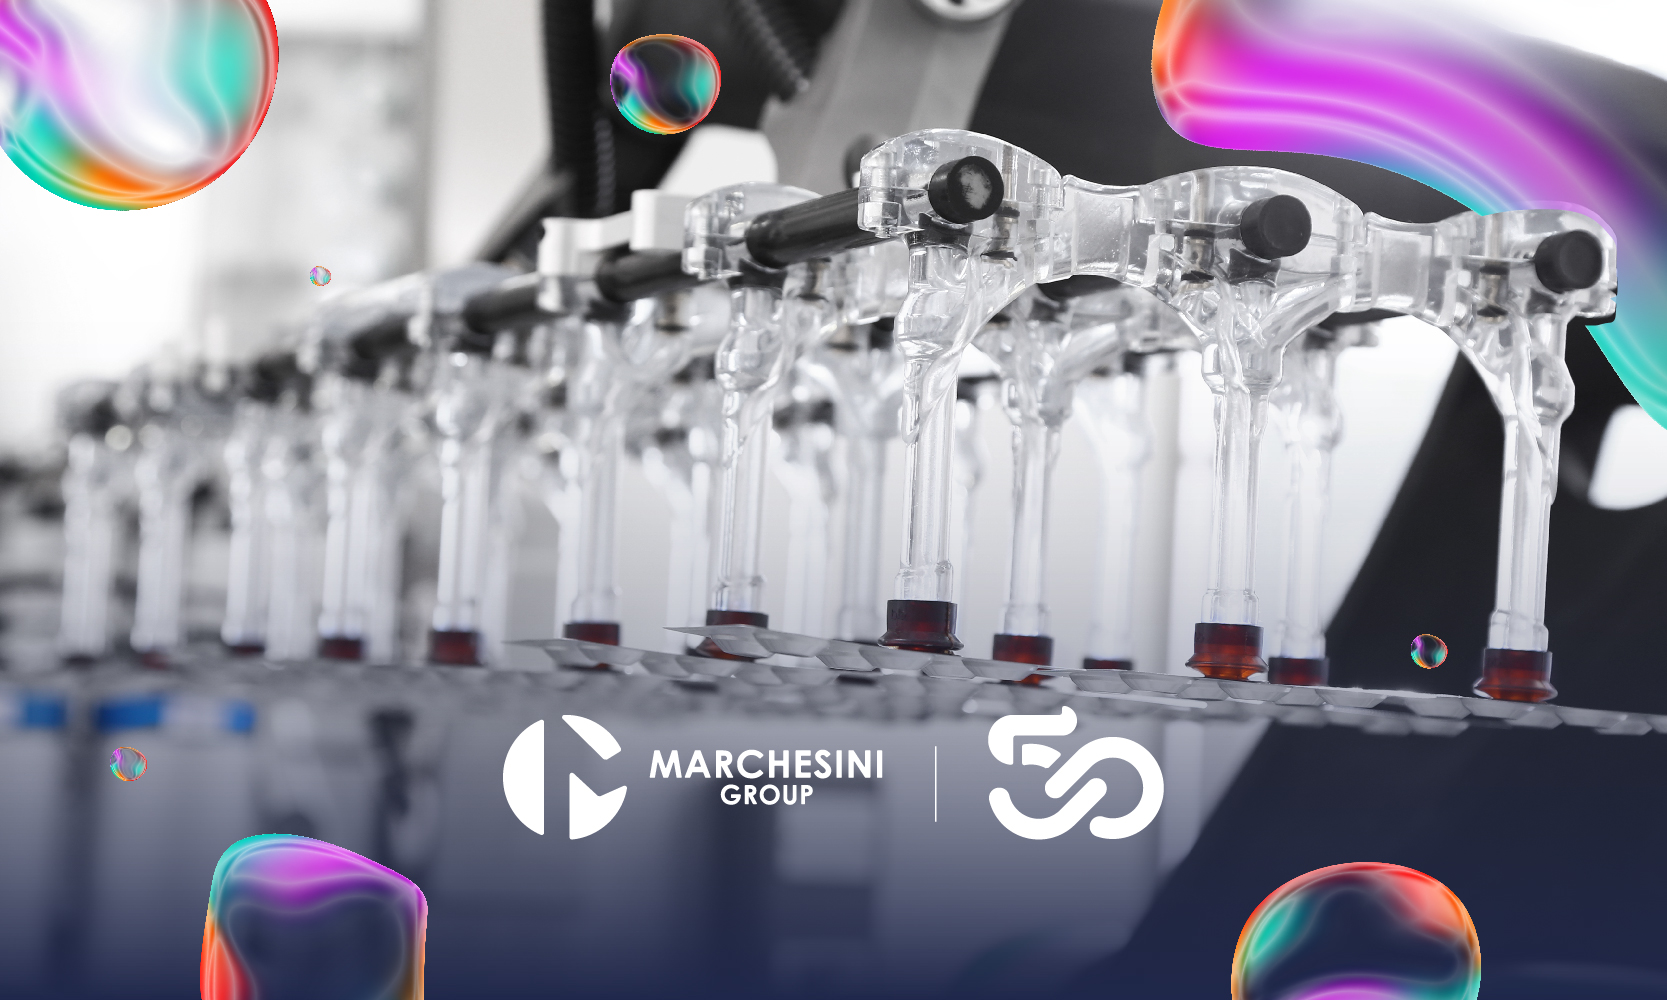 Marchesini group packaging pharma and cosmetics